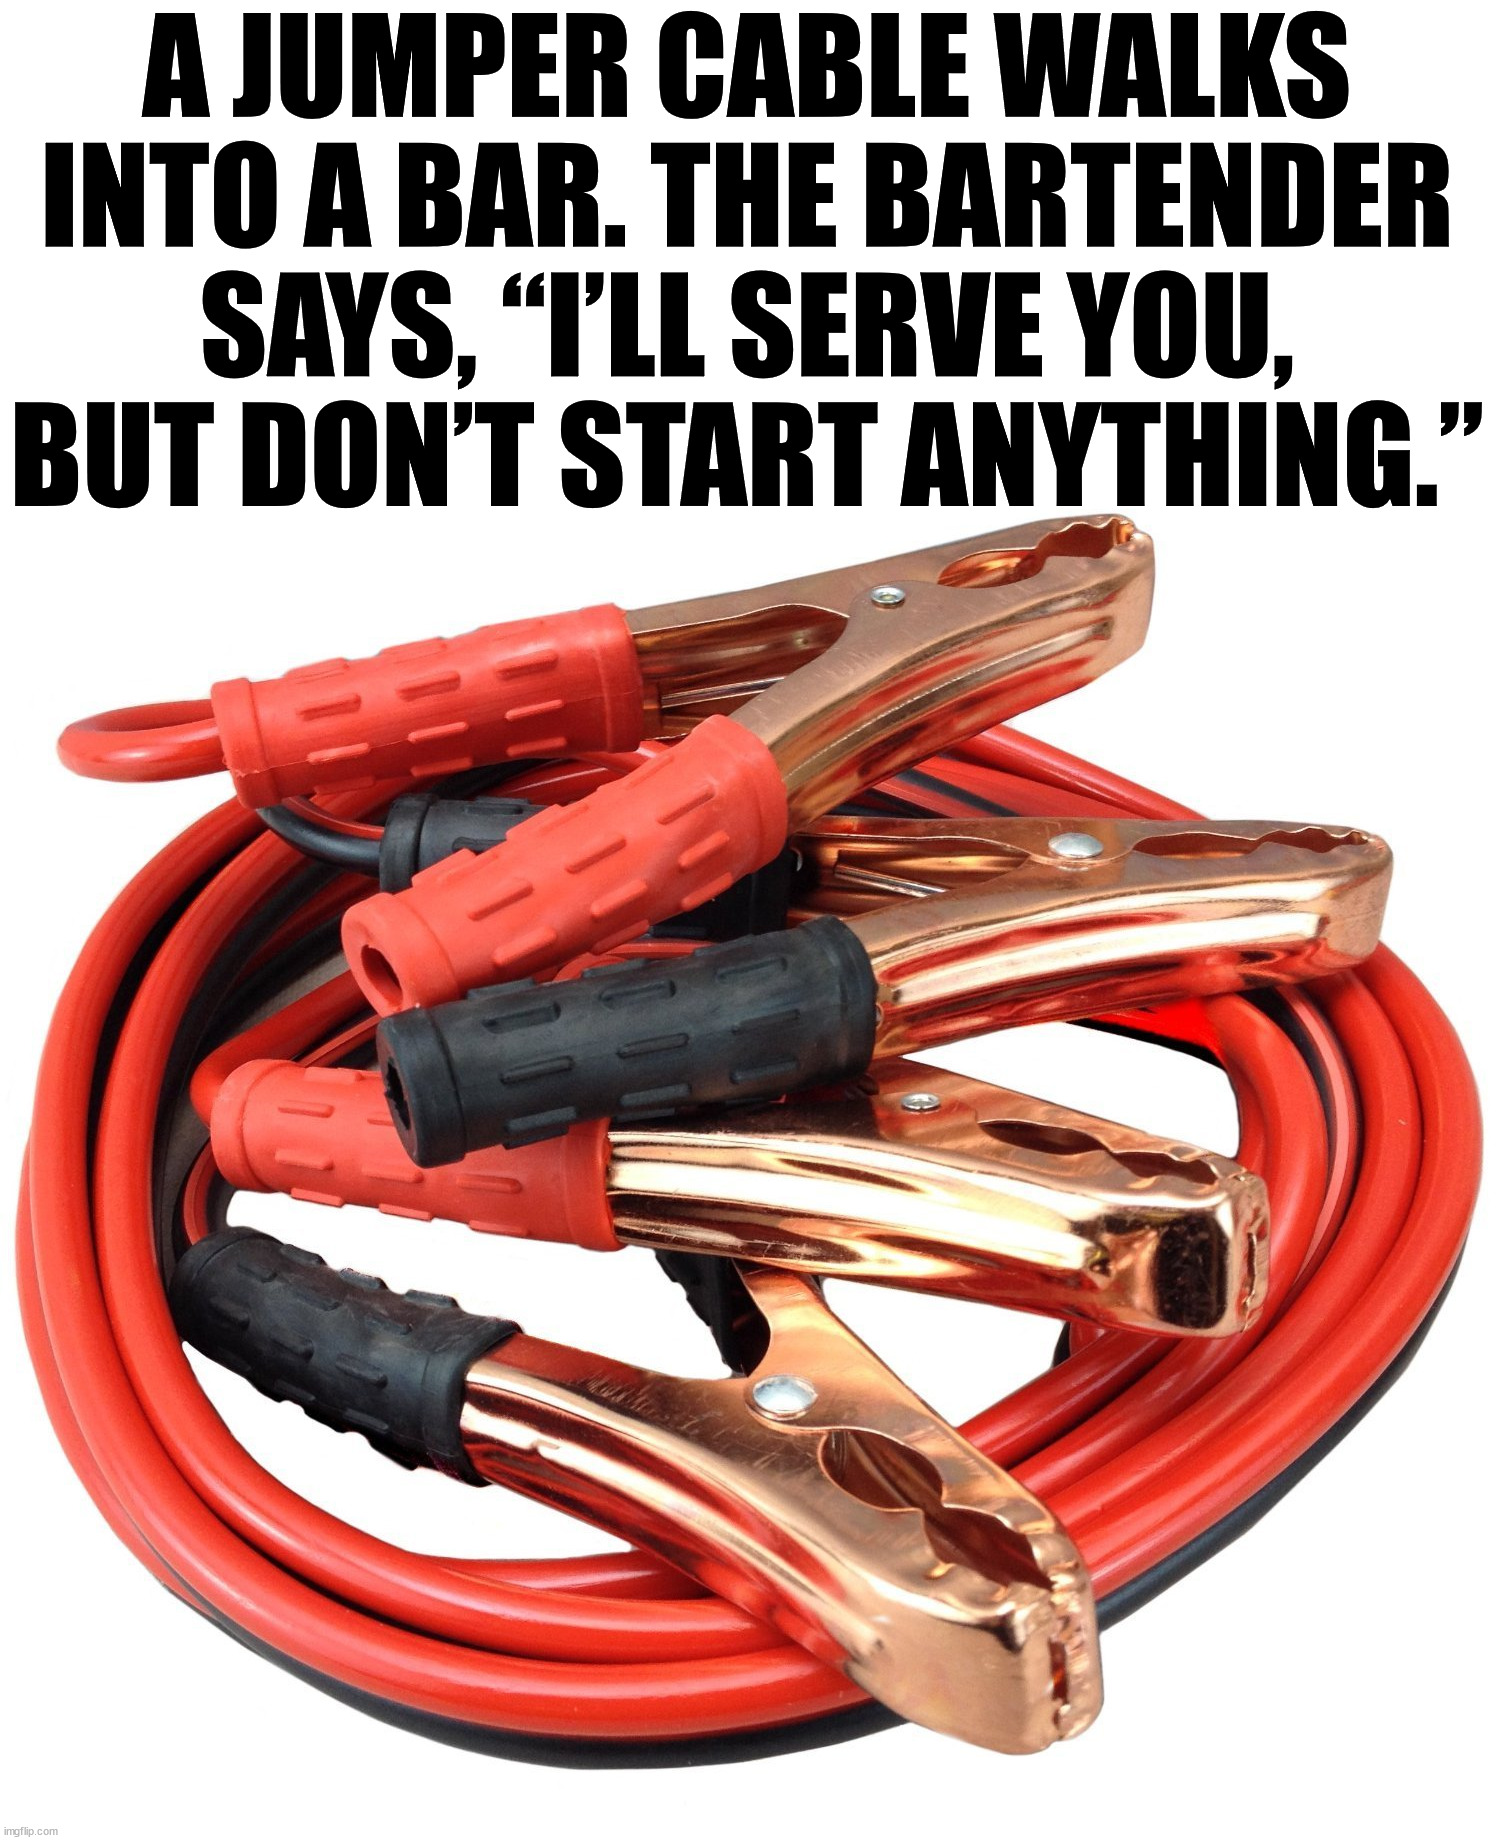 Jumper cables | A JUMPER CABLE WALKS INTO A BAR. THE BARTENDER SAYS, “I’LL SERVE YOU, BUT DON’T START ANYTHING.” | image tagged in jumper cables,eye roll | made w/ Imgflip meme maker